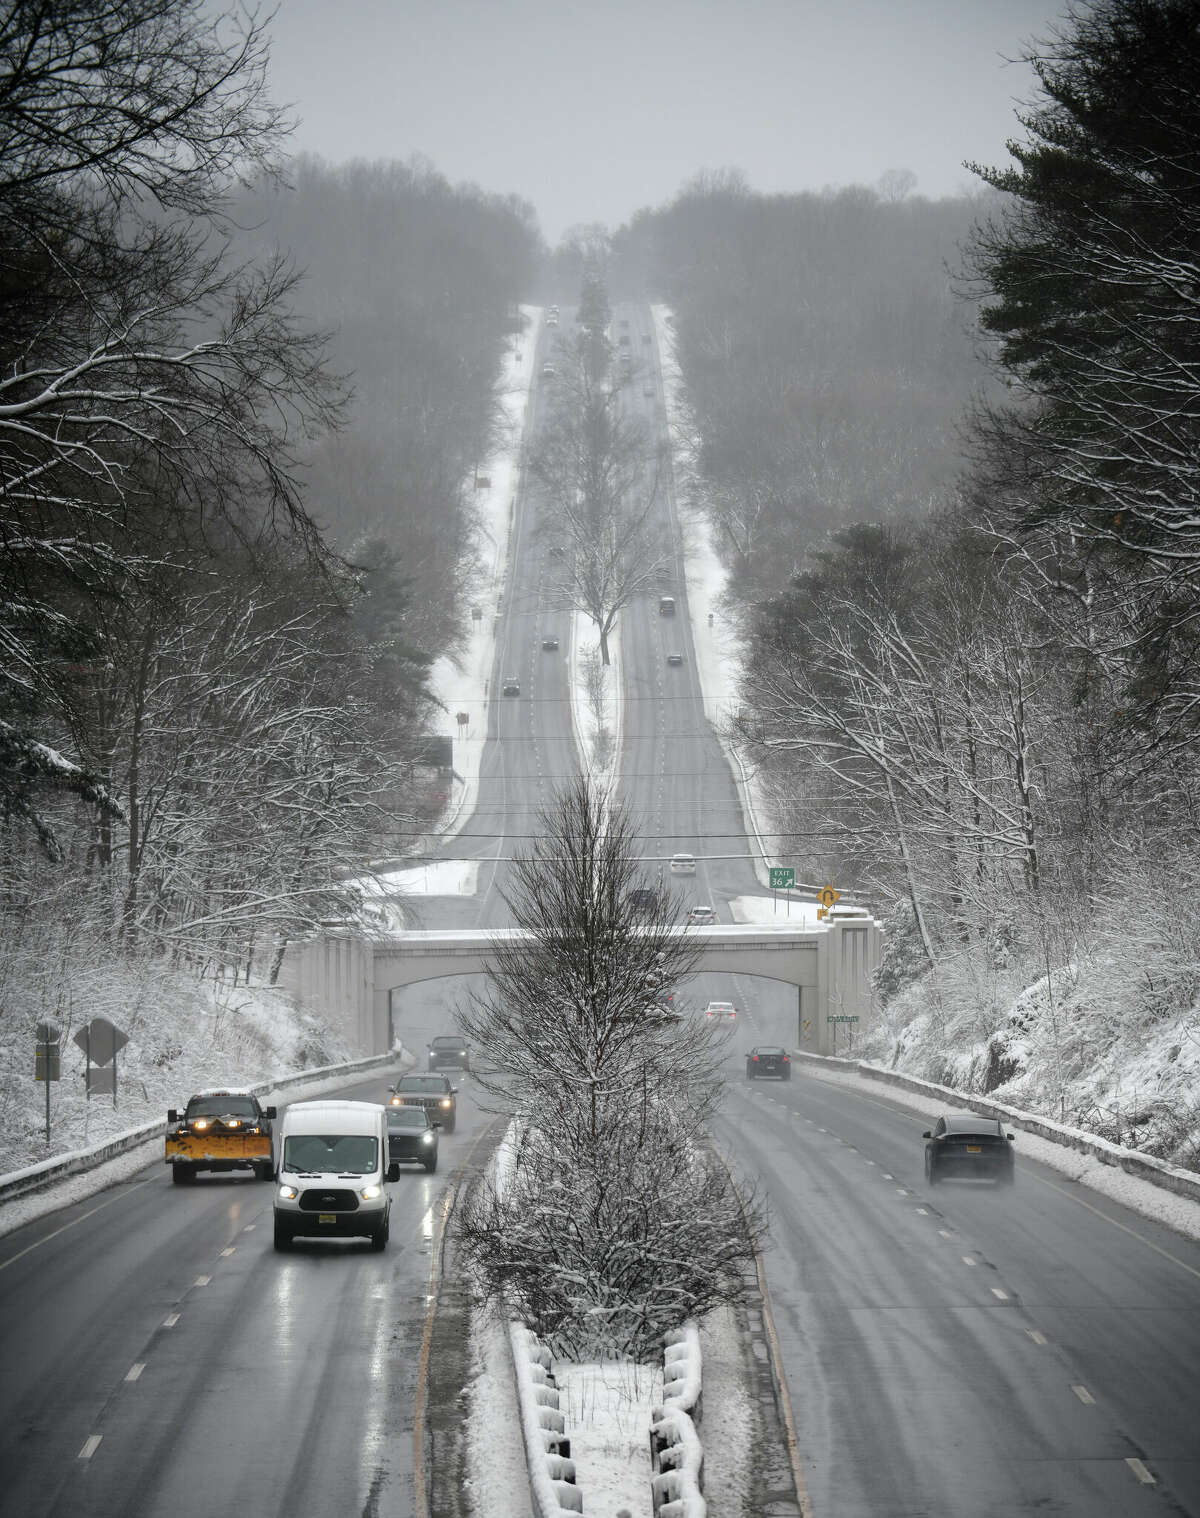 Traffic moves along the snowy Merritt Parkway near Exit 36 in New Canaan, Conn. Tuesday, Feb. 28, 2023. The area received its first measurable snow accumulation of the year, albeit just a few inches, from a storm Monday night through Tuesday morning.